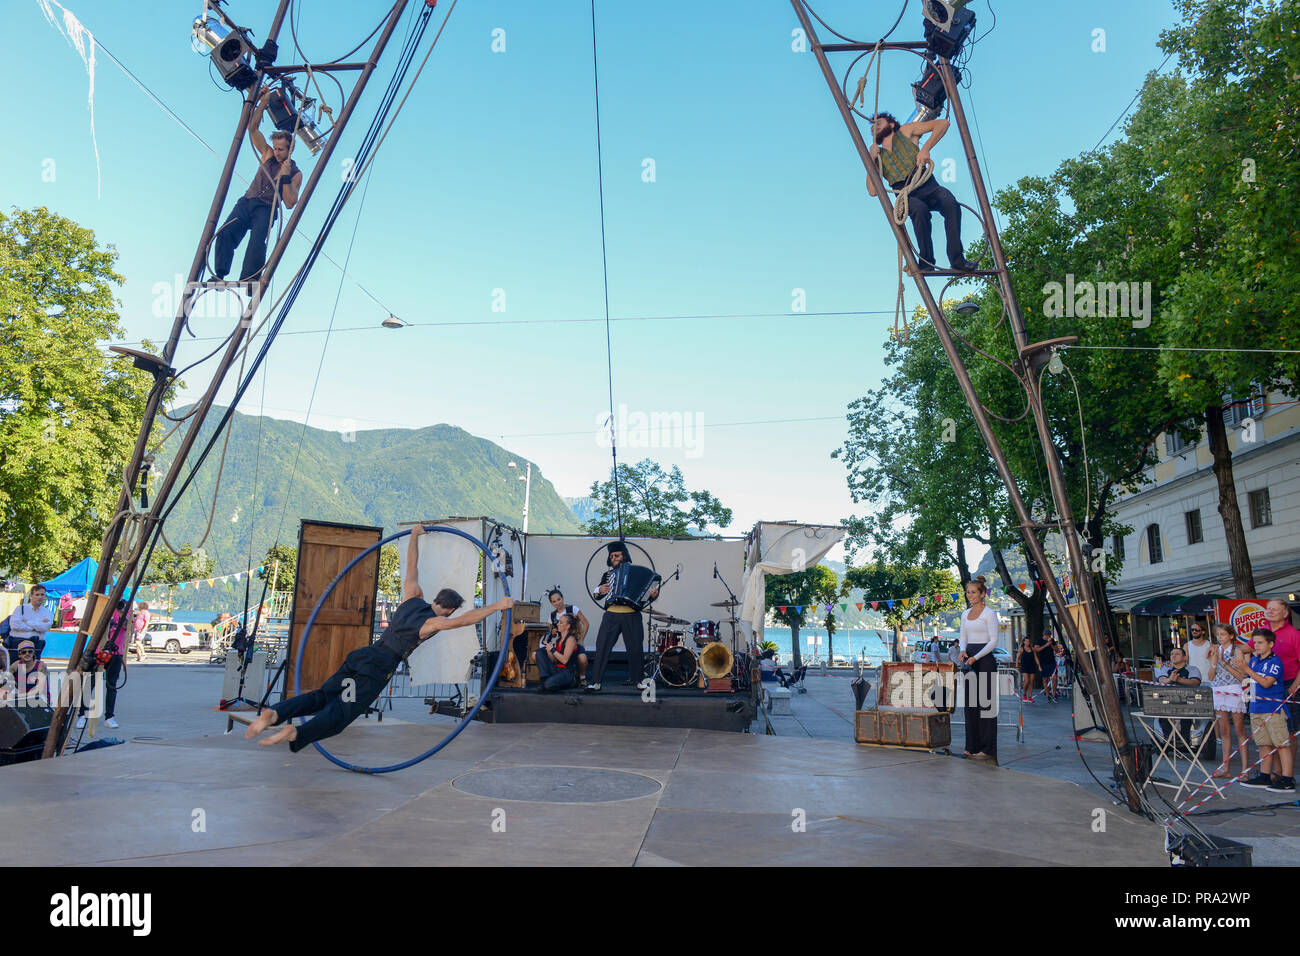 Lugano, Switzerland - 15 July 2016 - Acrobat on a hula hoop does tricks at Buskers Festival in Lugano, Switzerland Stock Photo